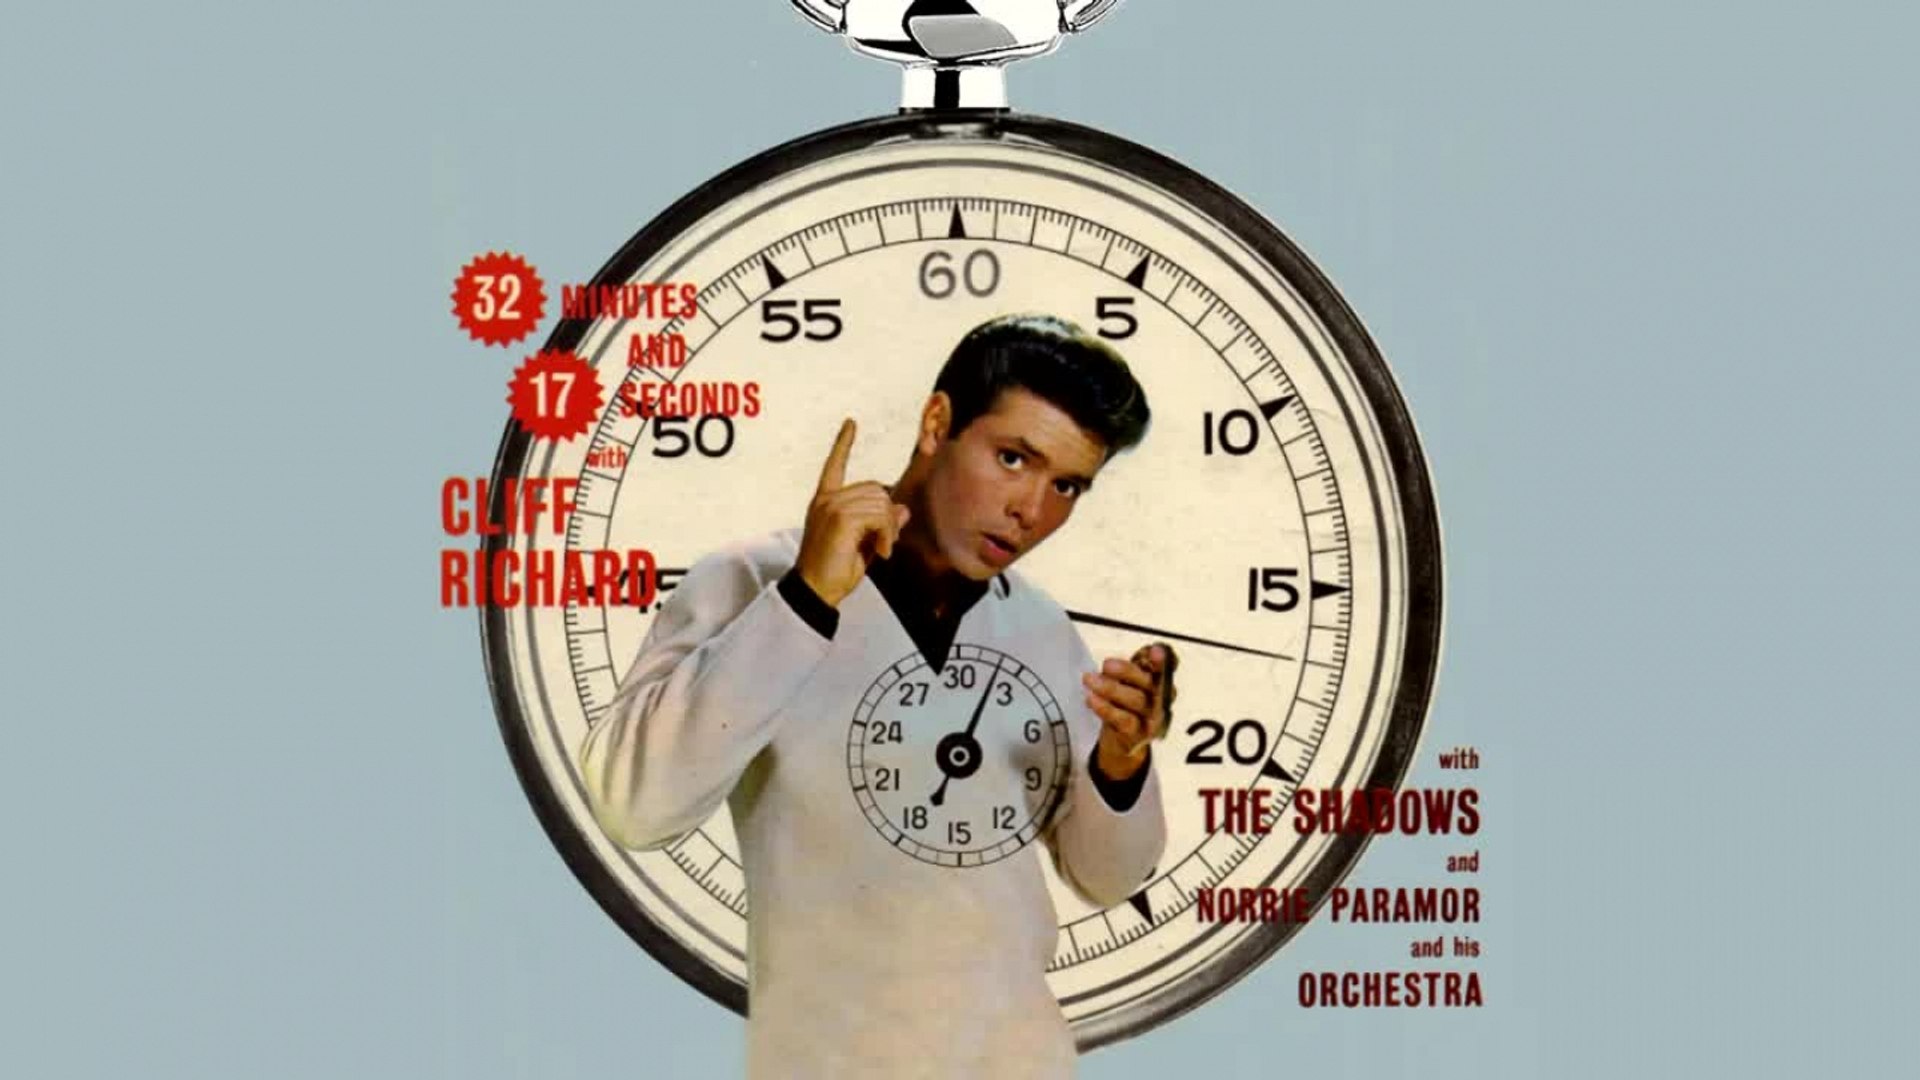 ⁣Cliff Richard with The Shadows - 32 Minutes and 17 Seconds - Vintage Music Songs